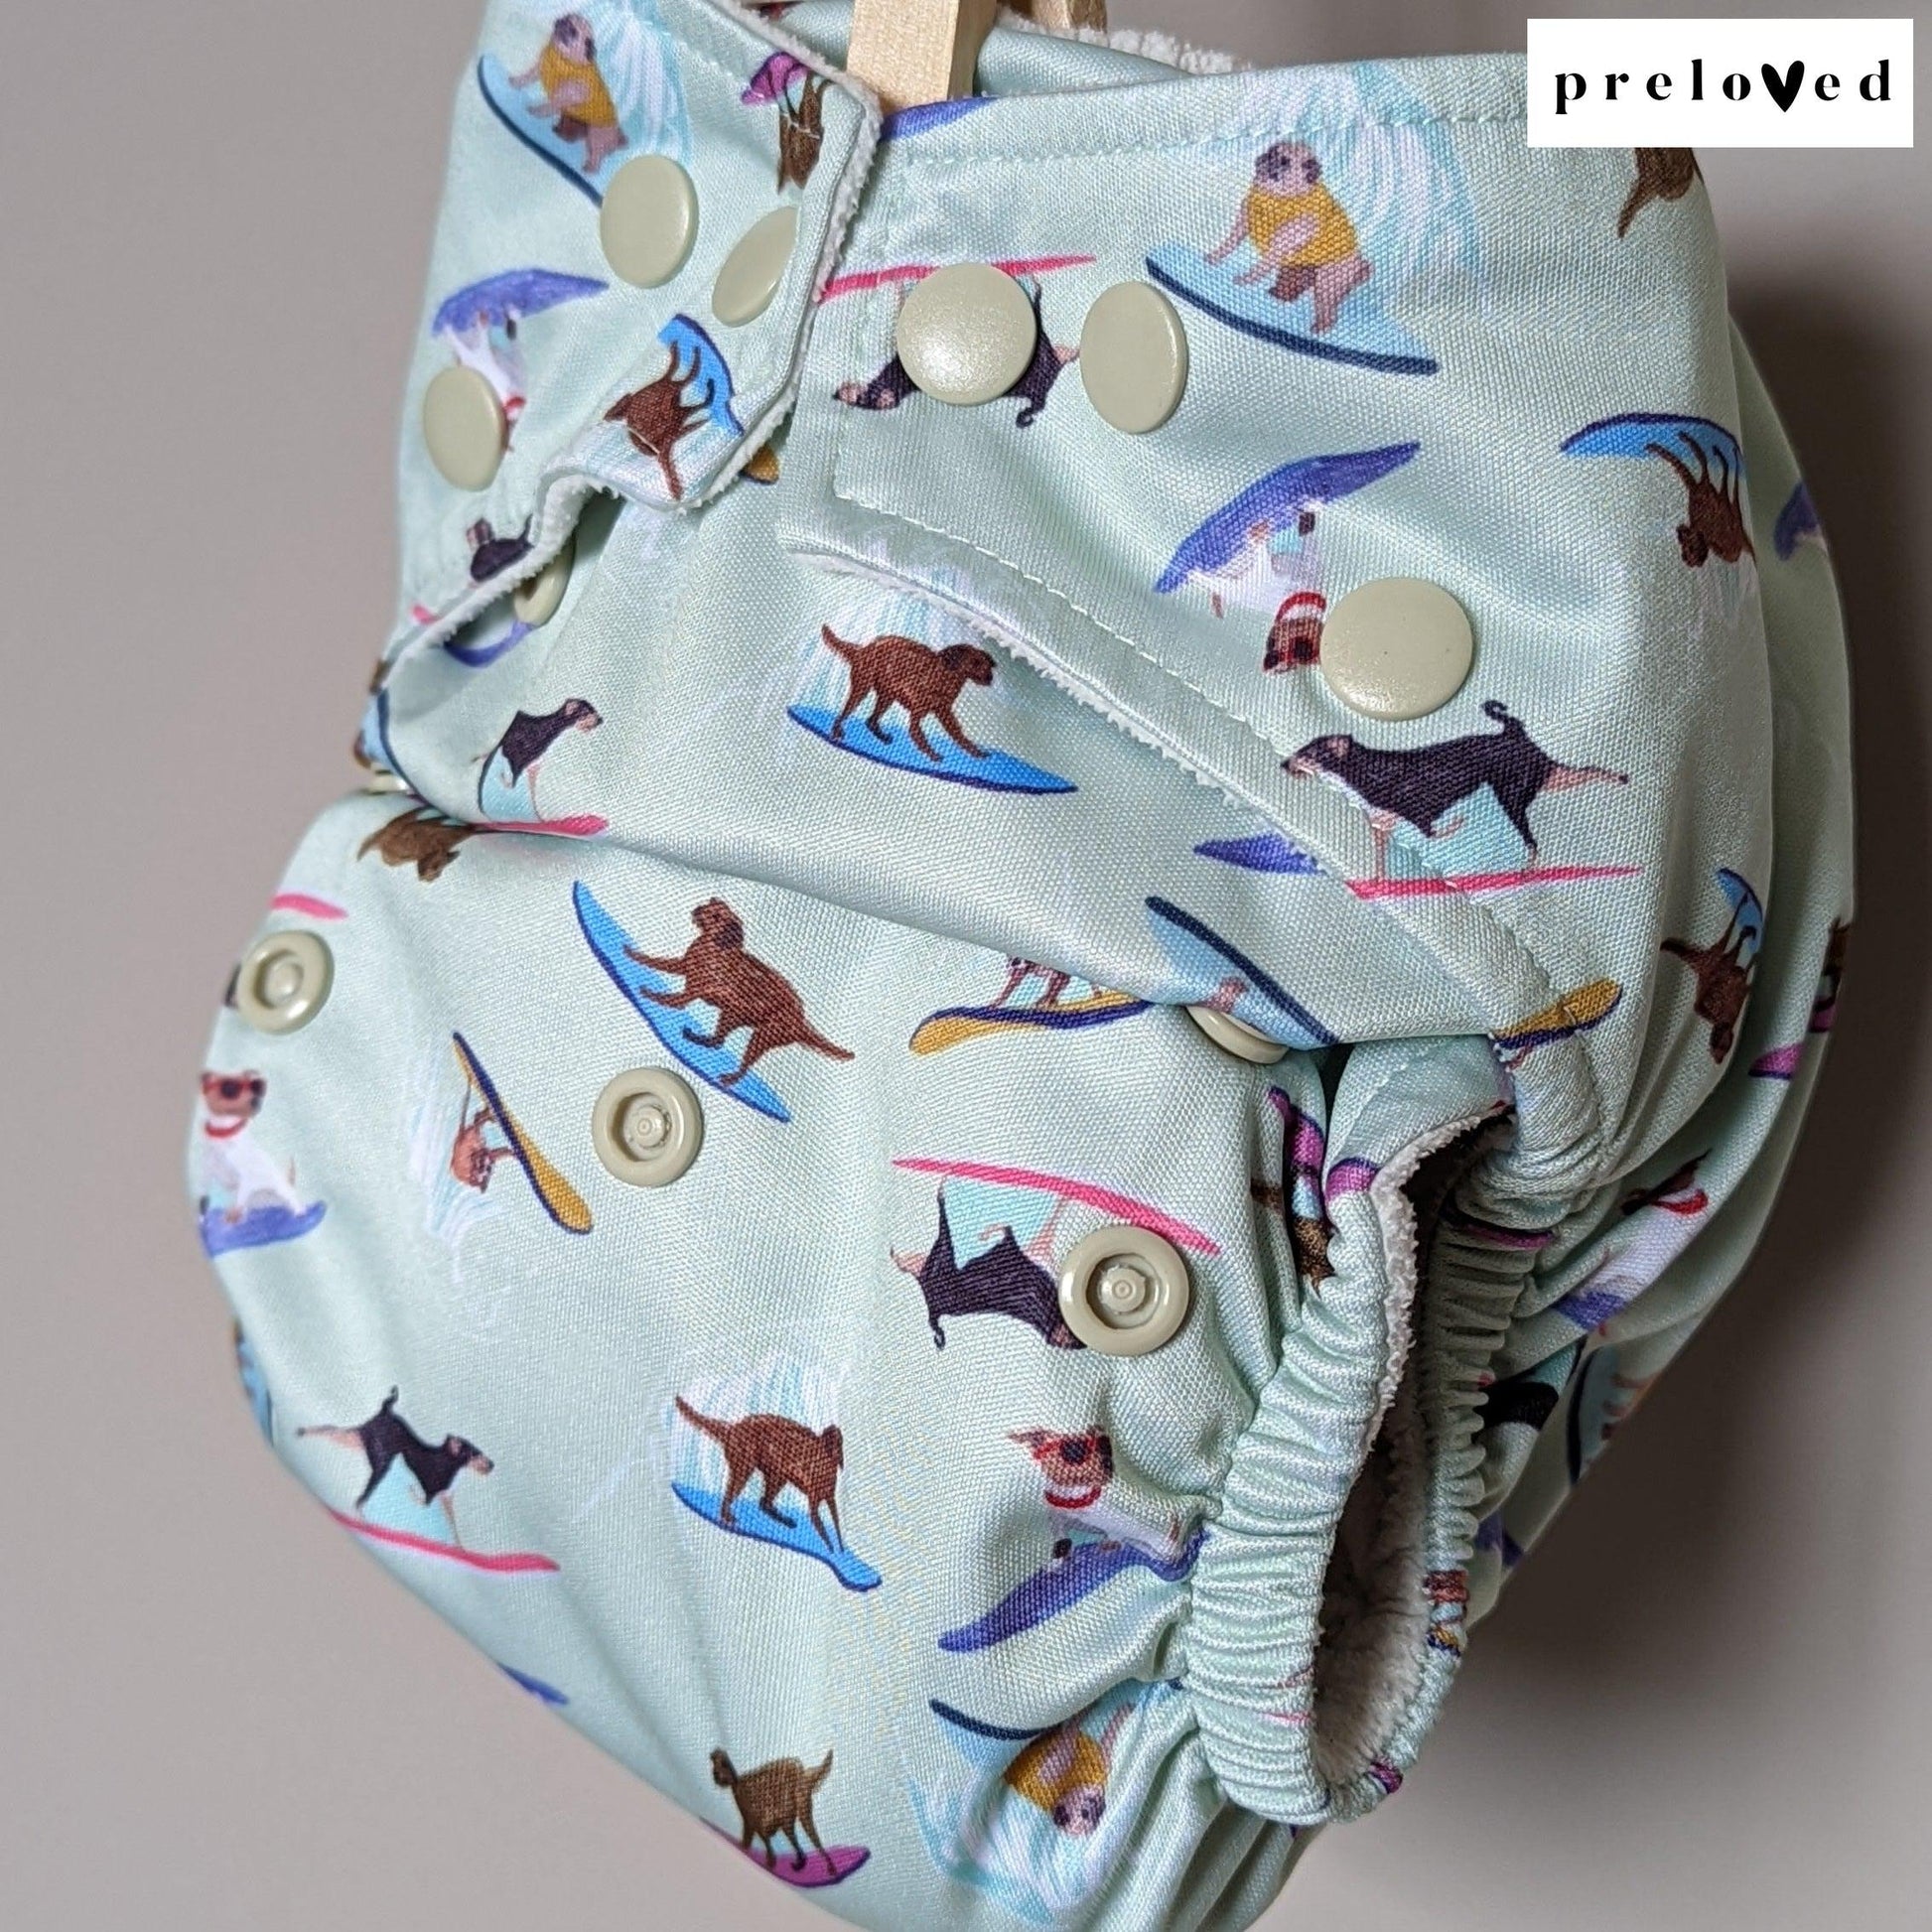 Baba & Boo Pocket Nappies (multiple patterns)-Pocket Nappy-Baba & Boo-Surfing Dogs-The Nappy Market